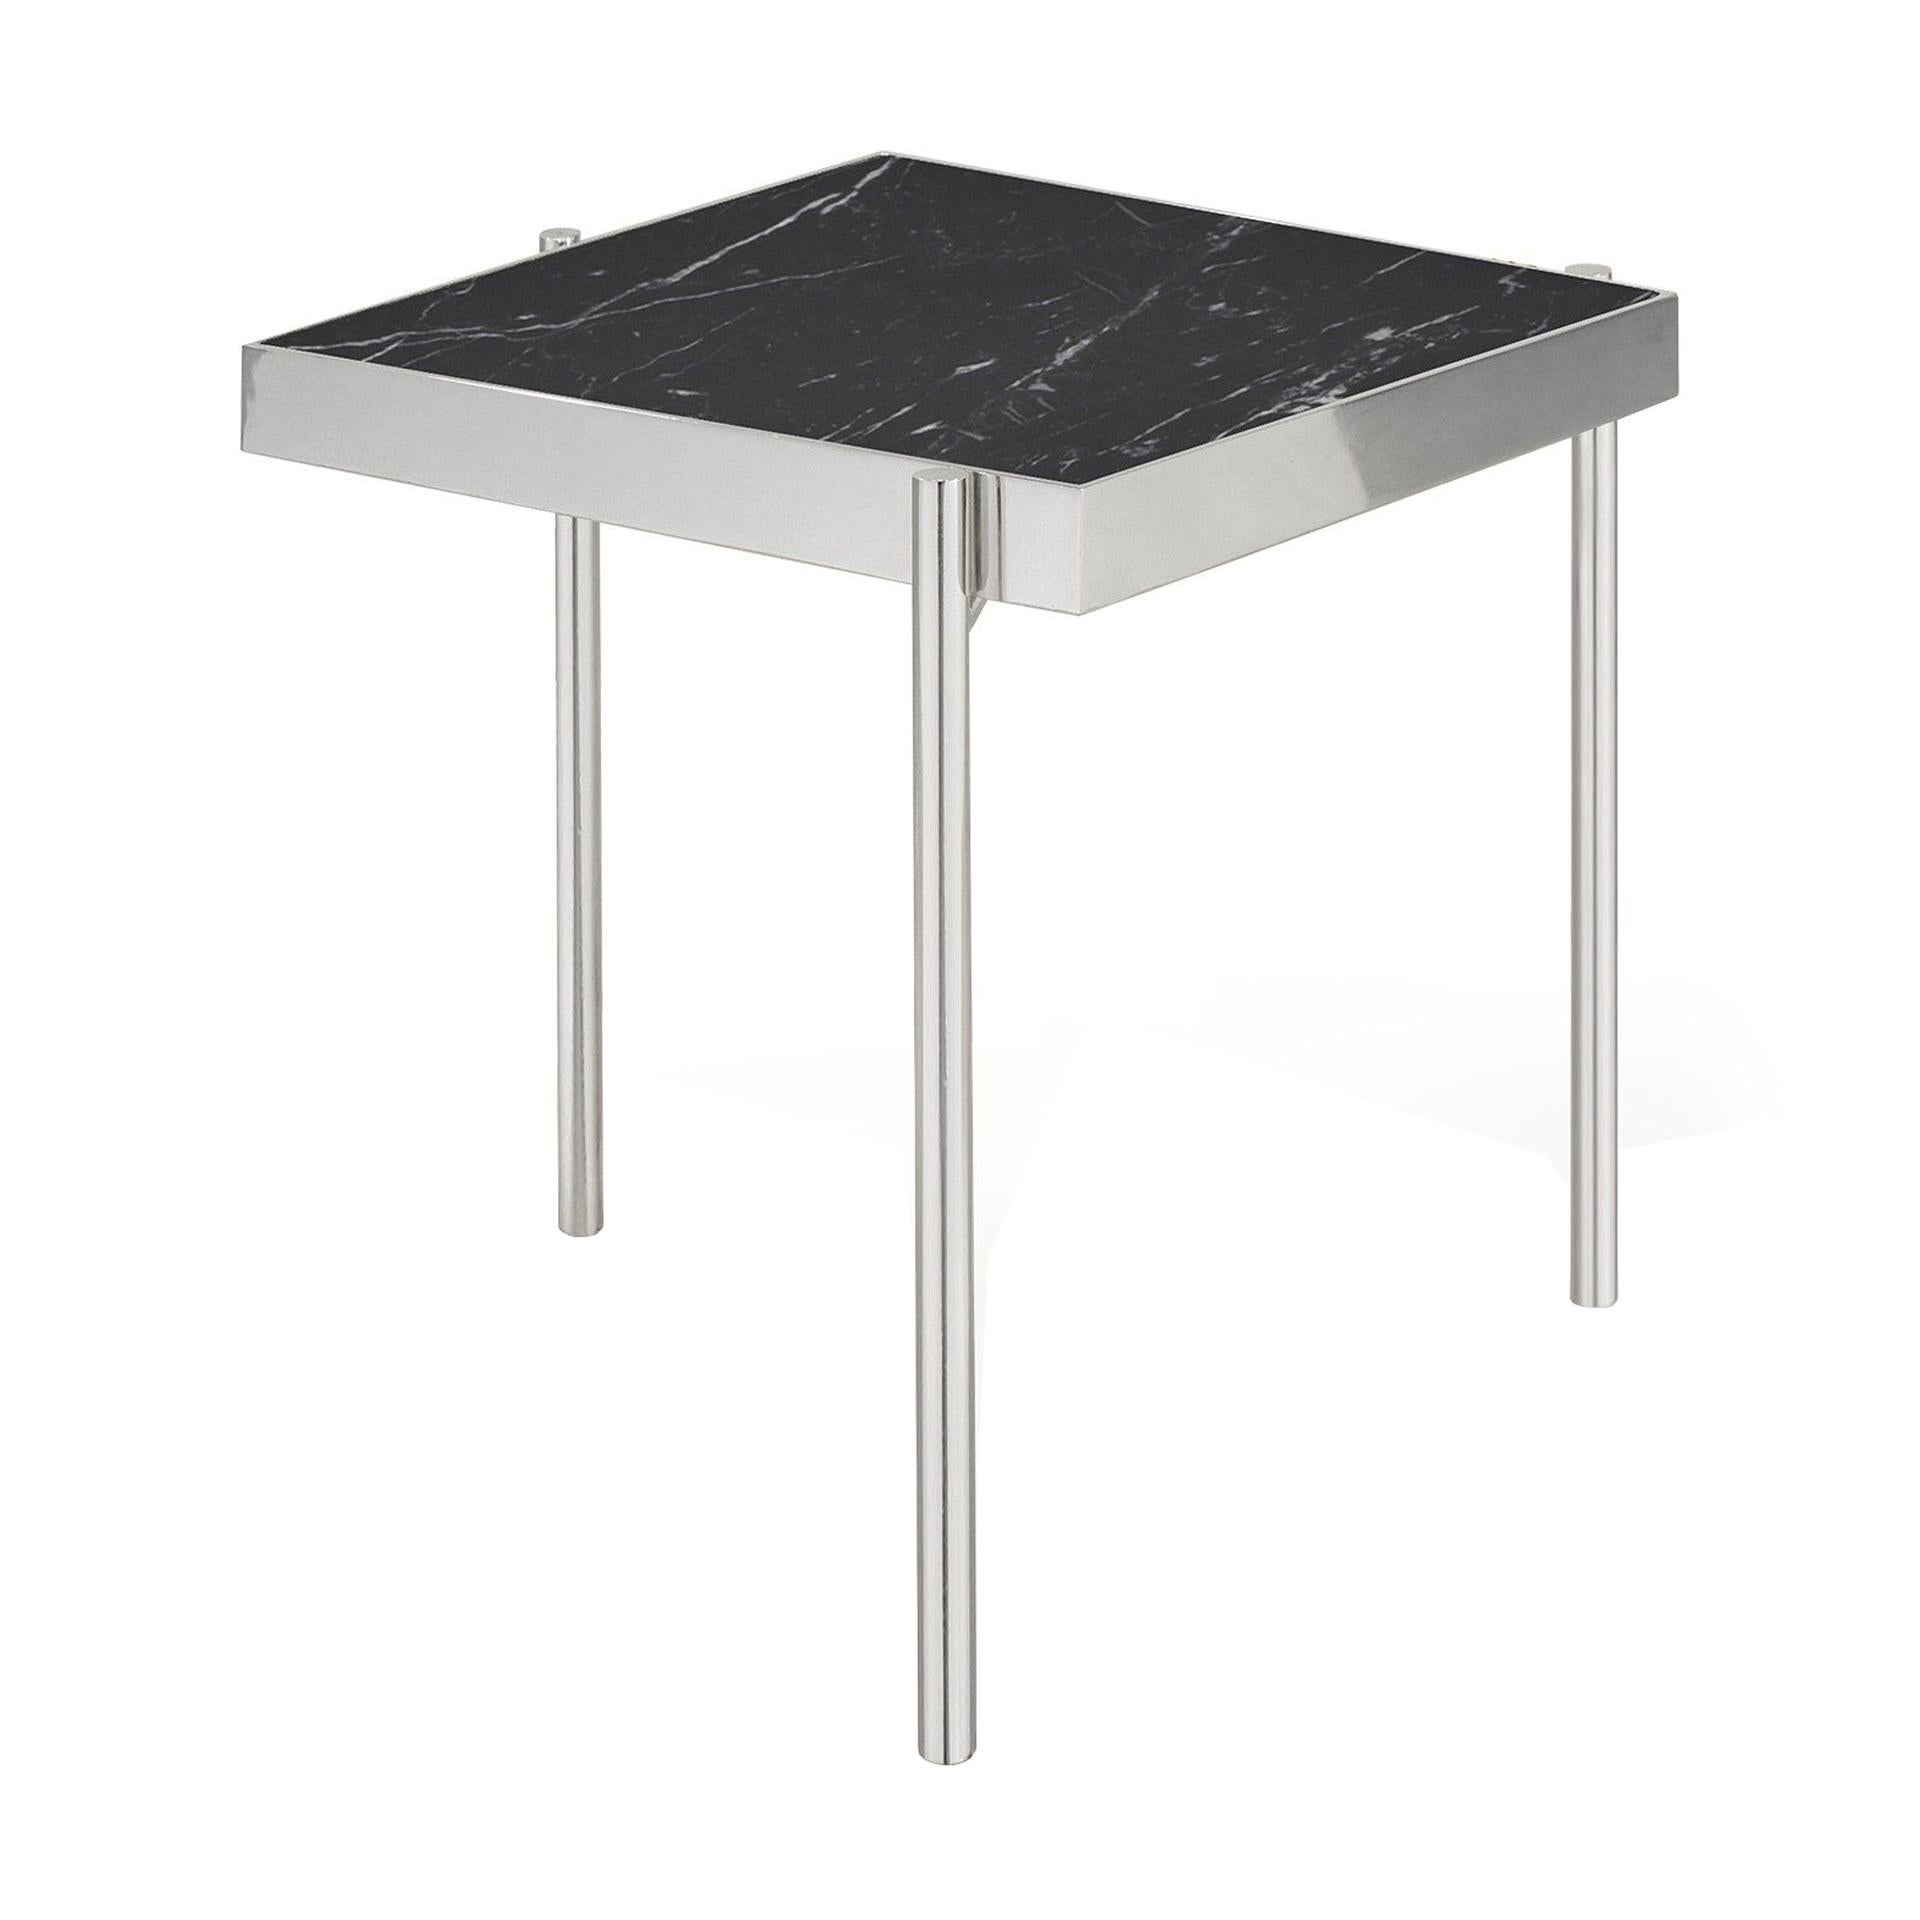 Portuguese Pair of Black Nero Marquina Marble Stainless Steel Side Tables For Sale